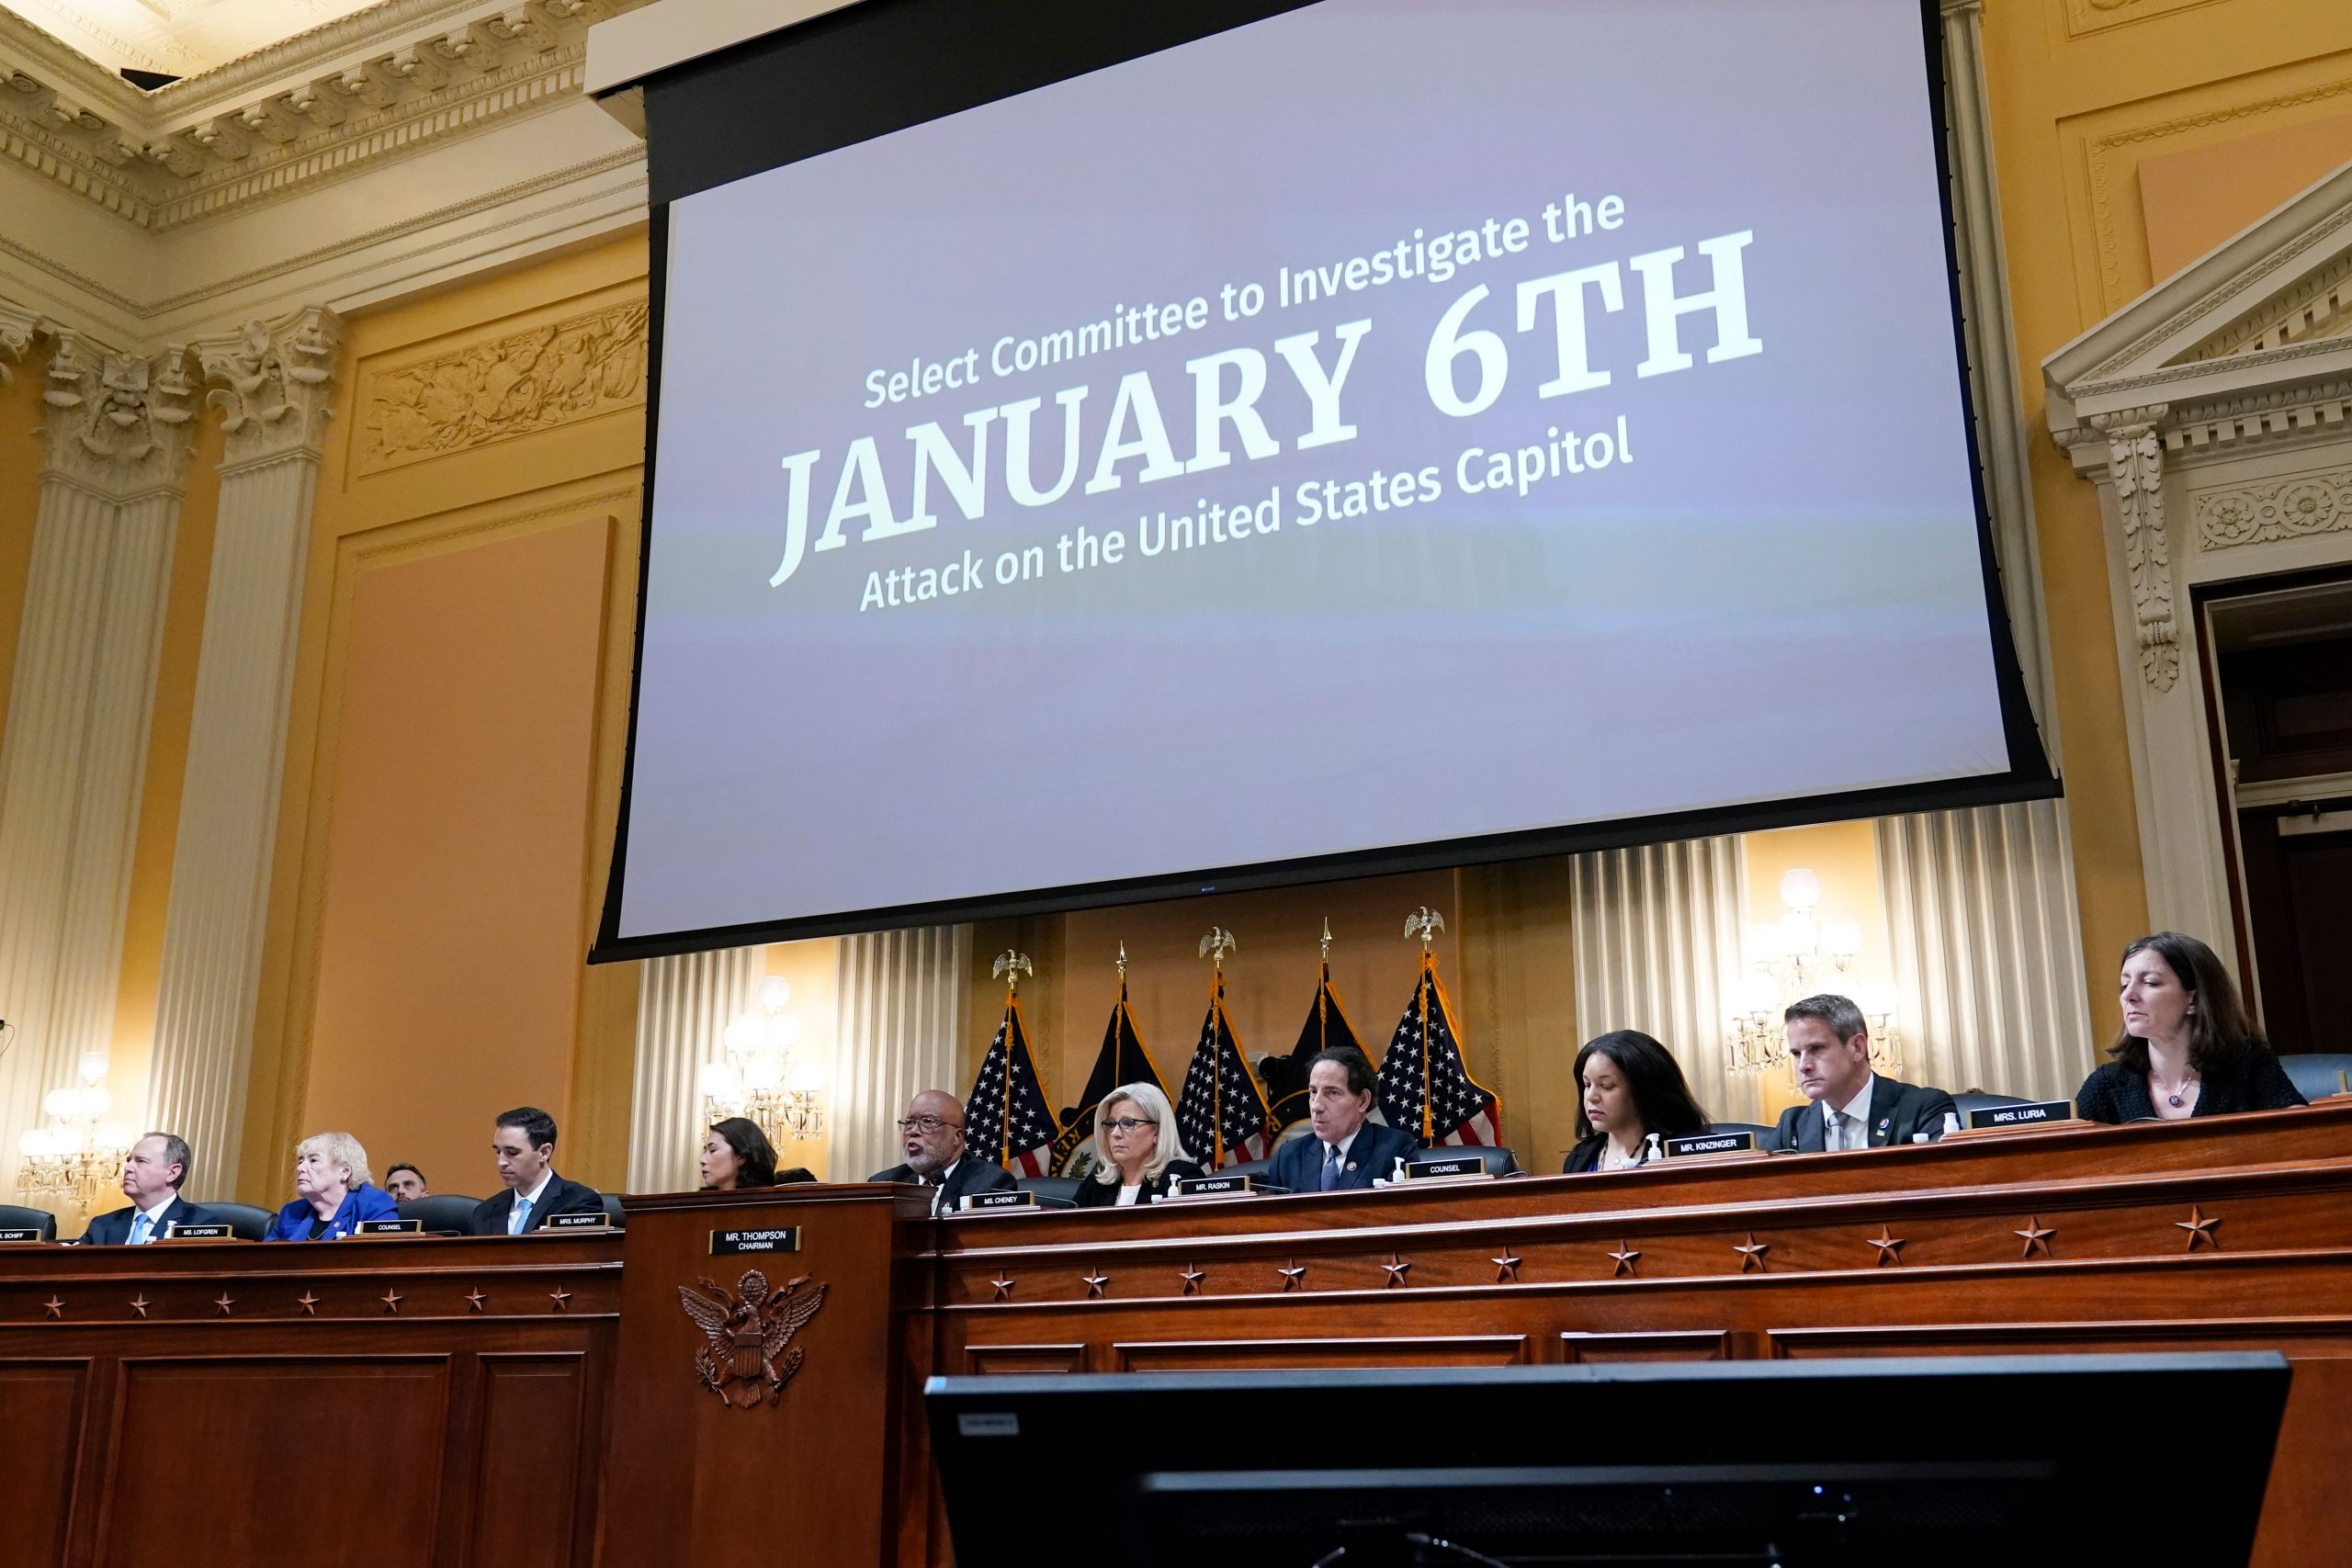 January 6 hearings: What to expect from the second prime-time session